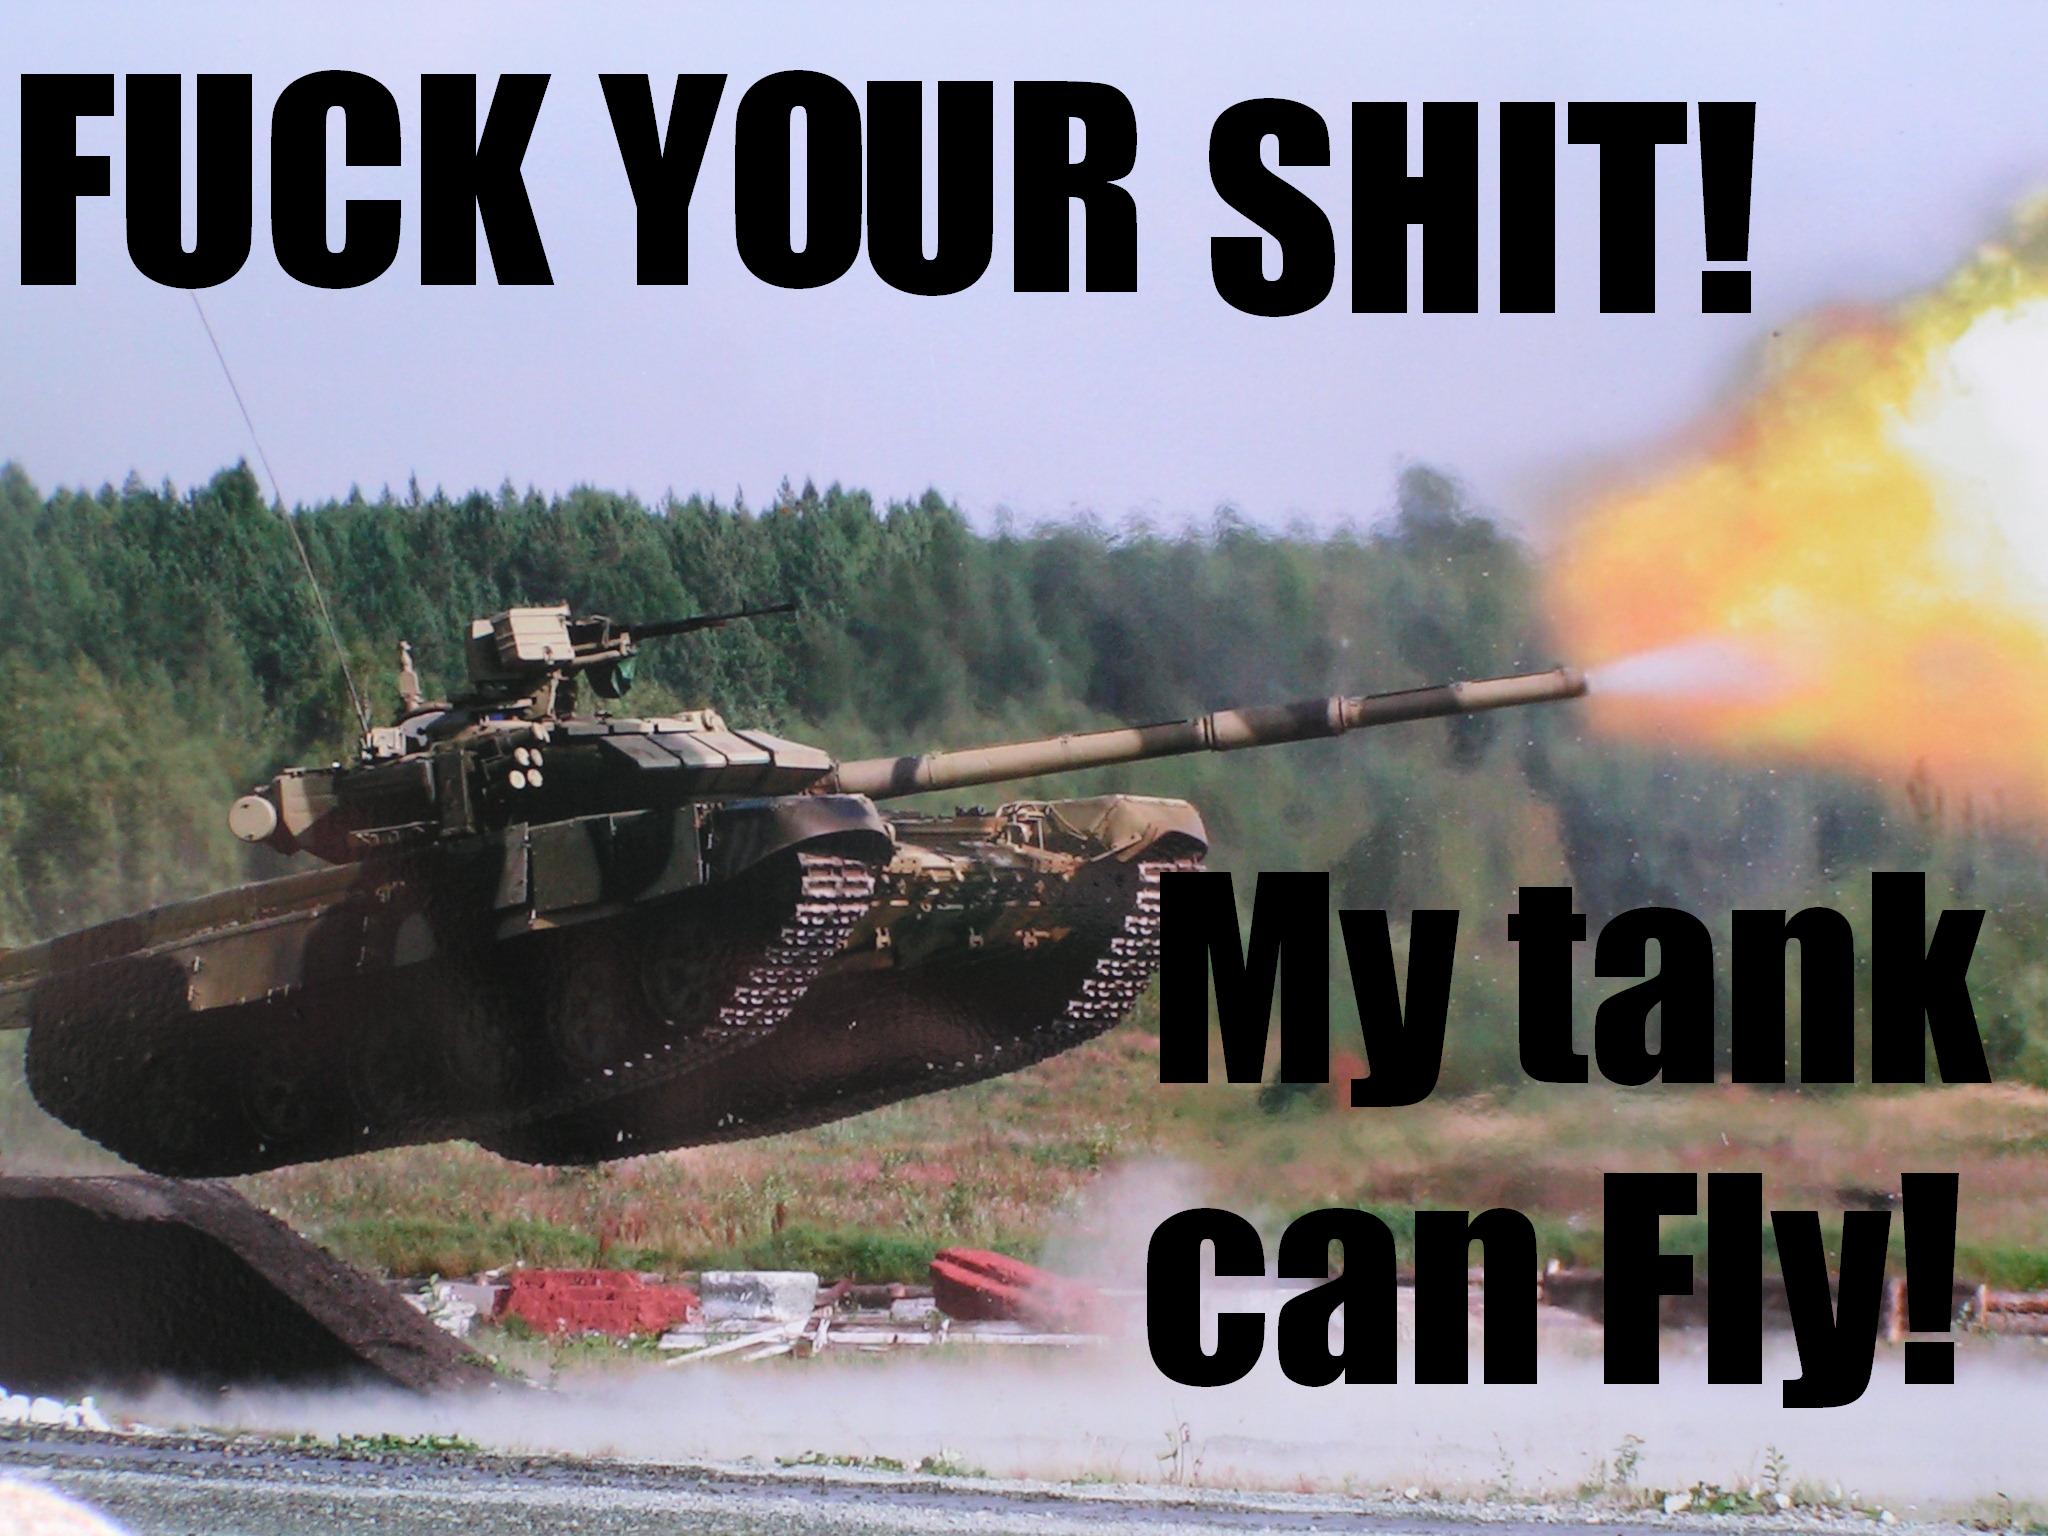 military - Fuck Your Shit! My tank can Fly!